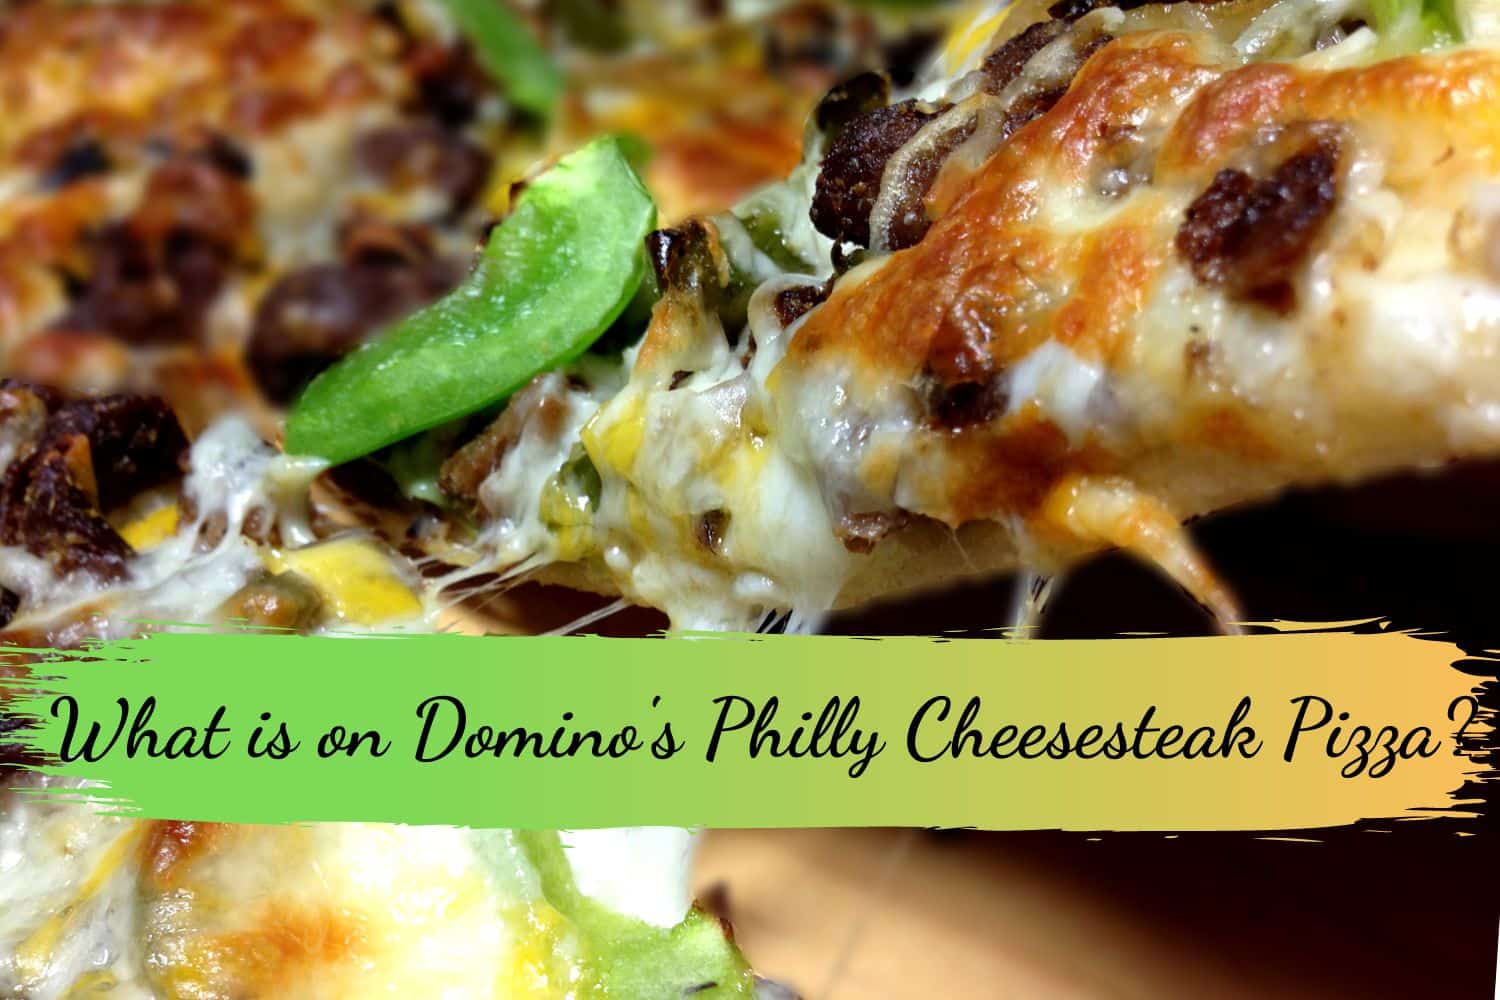 What is on Domino's Philly Cheesesteak Pizza?